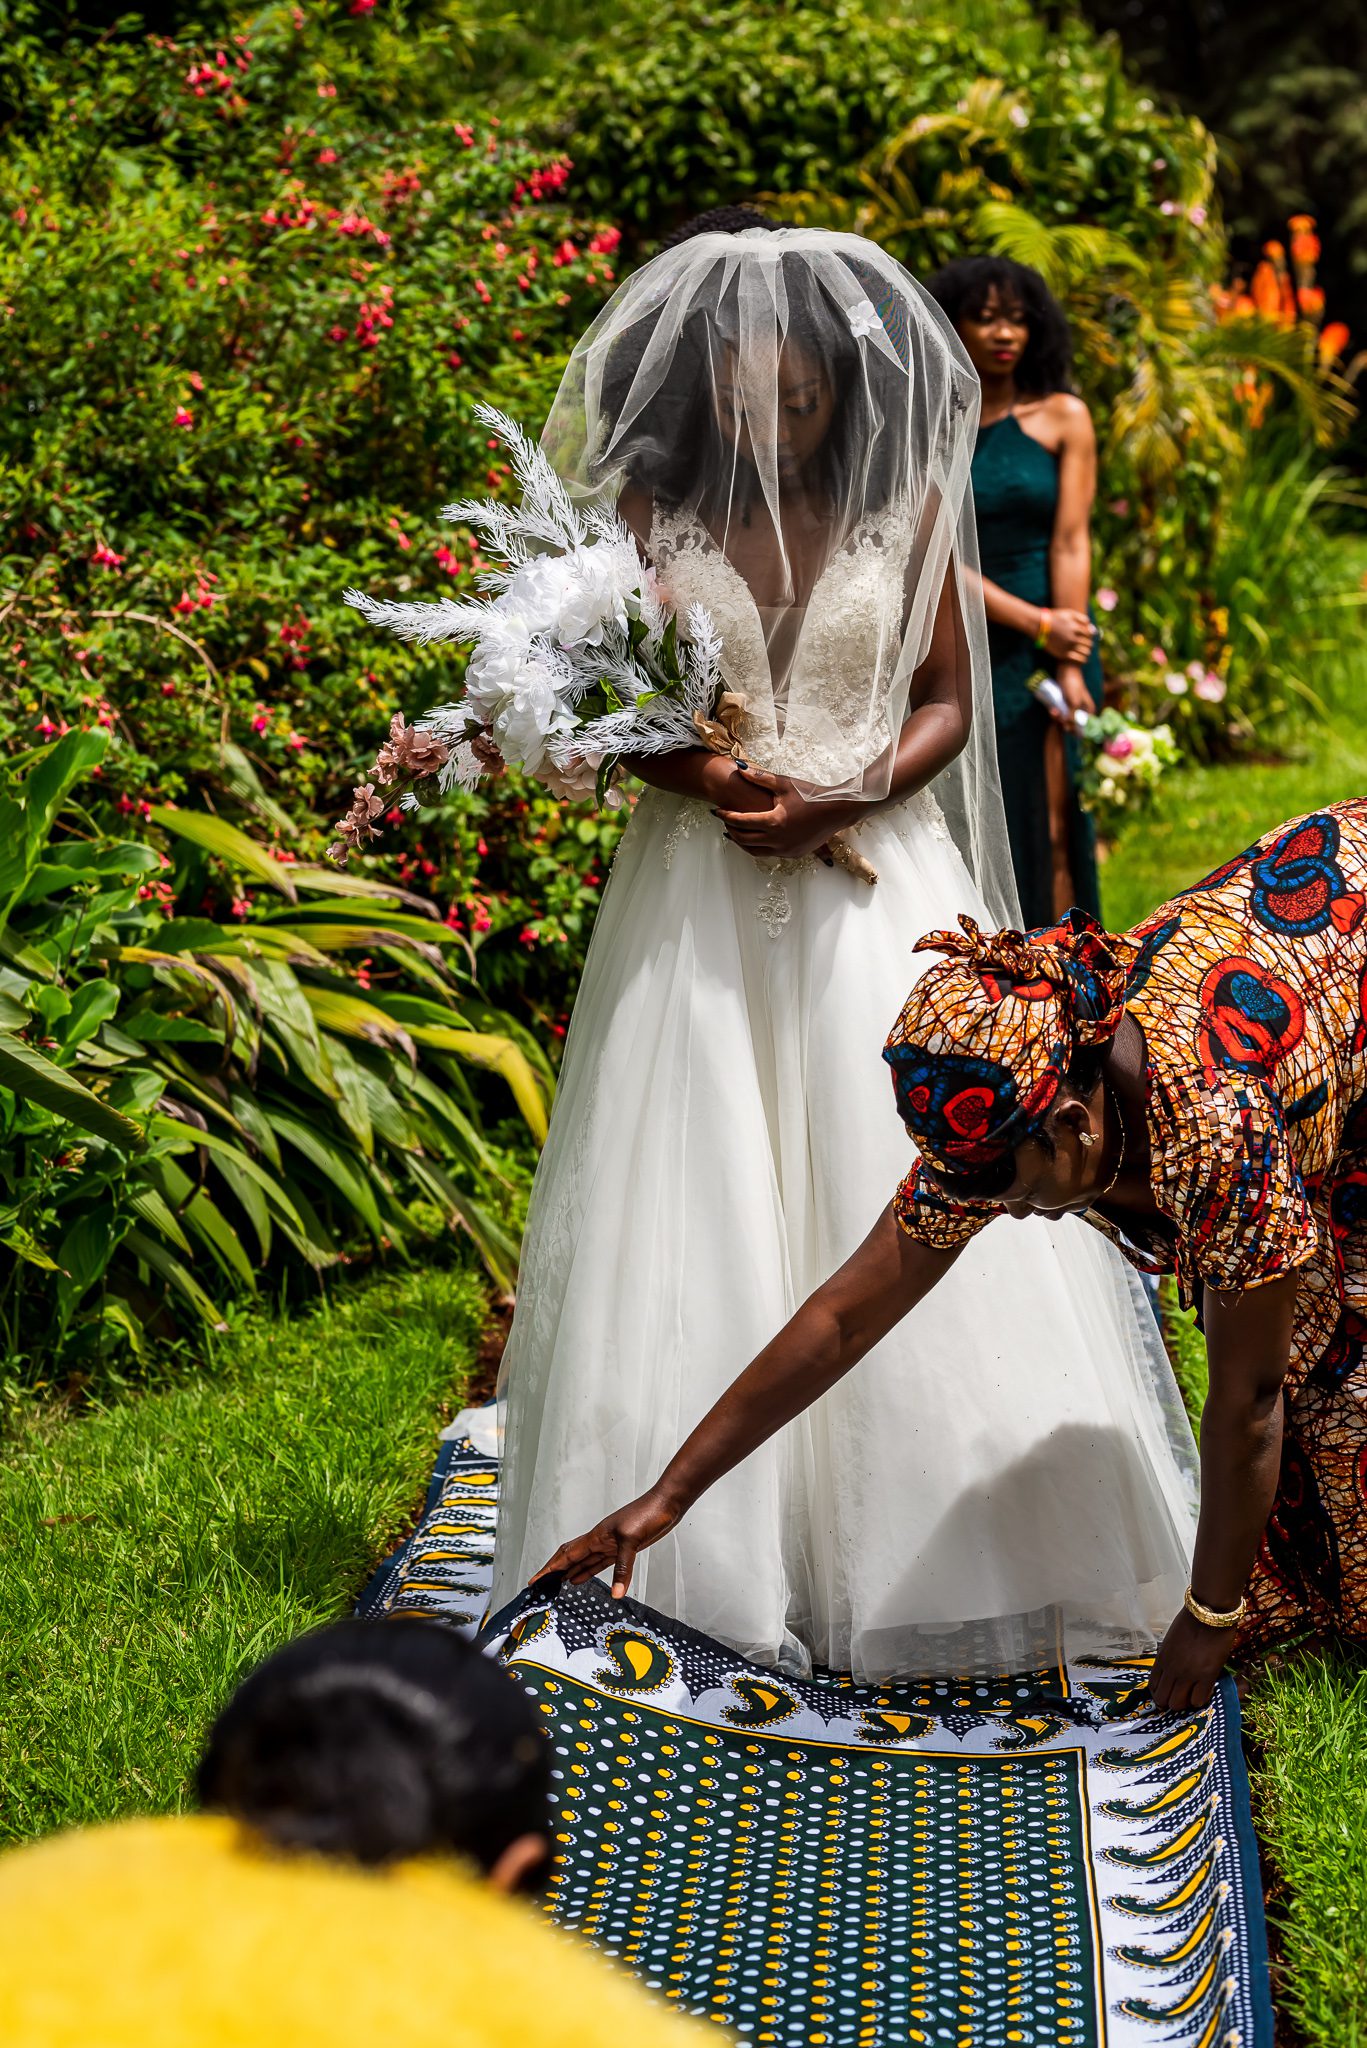 a woman lays a cloth down on the ground in front of a bride before she walks down the isle